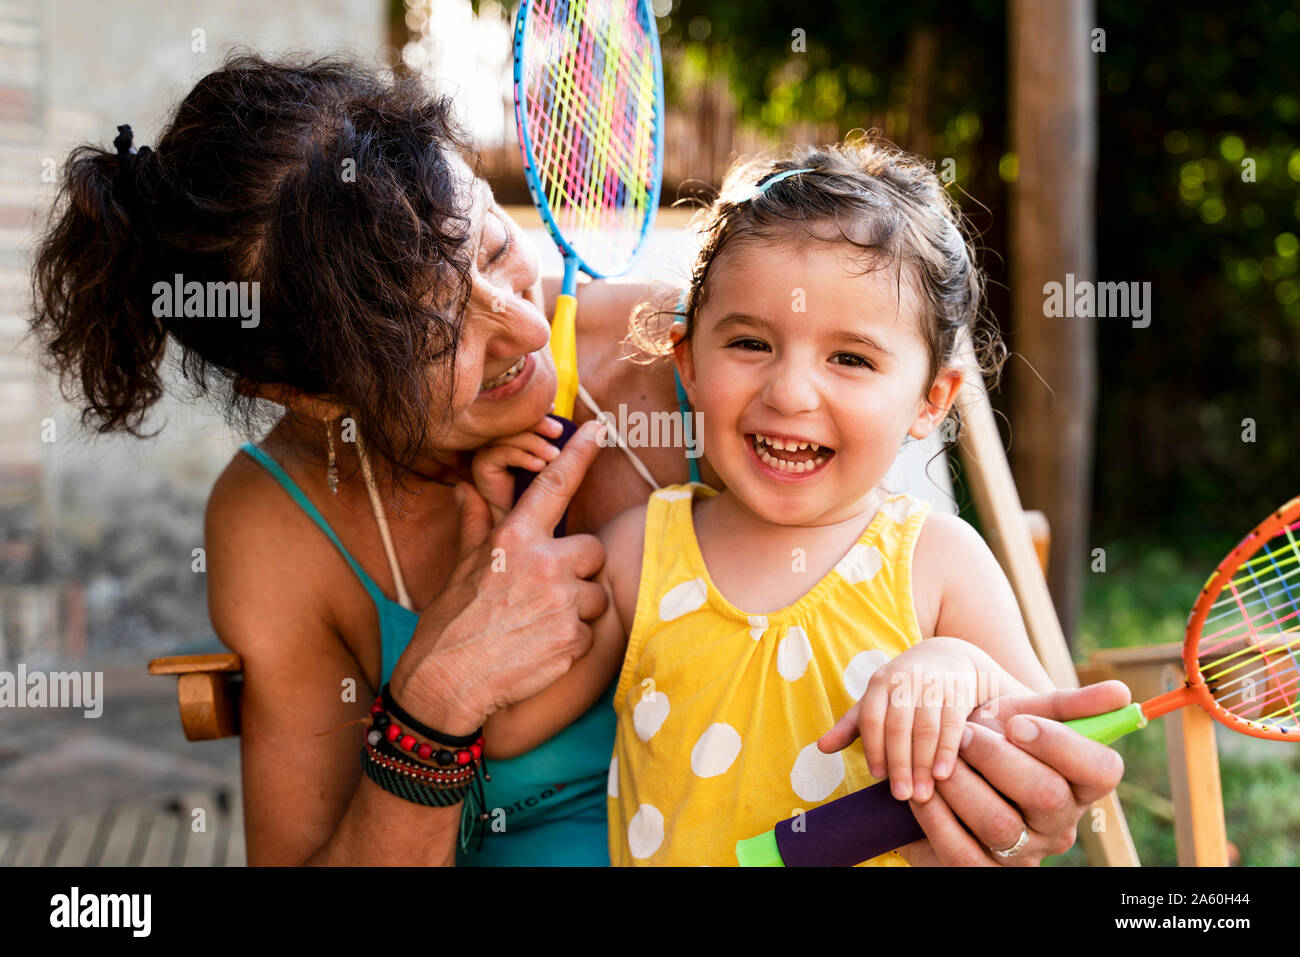 Grandmother playing with little girl and badminton rackets outdoors Stock Photo